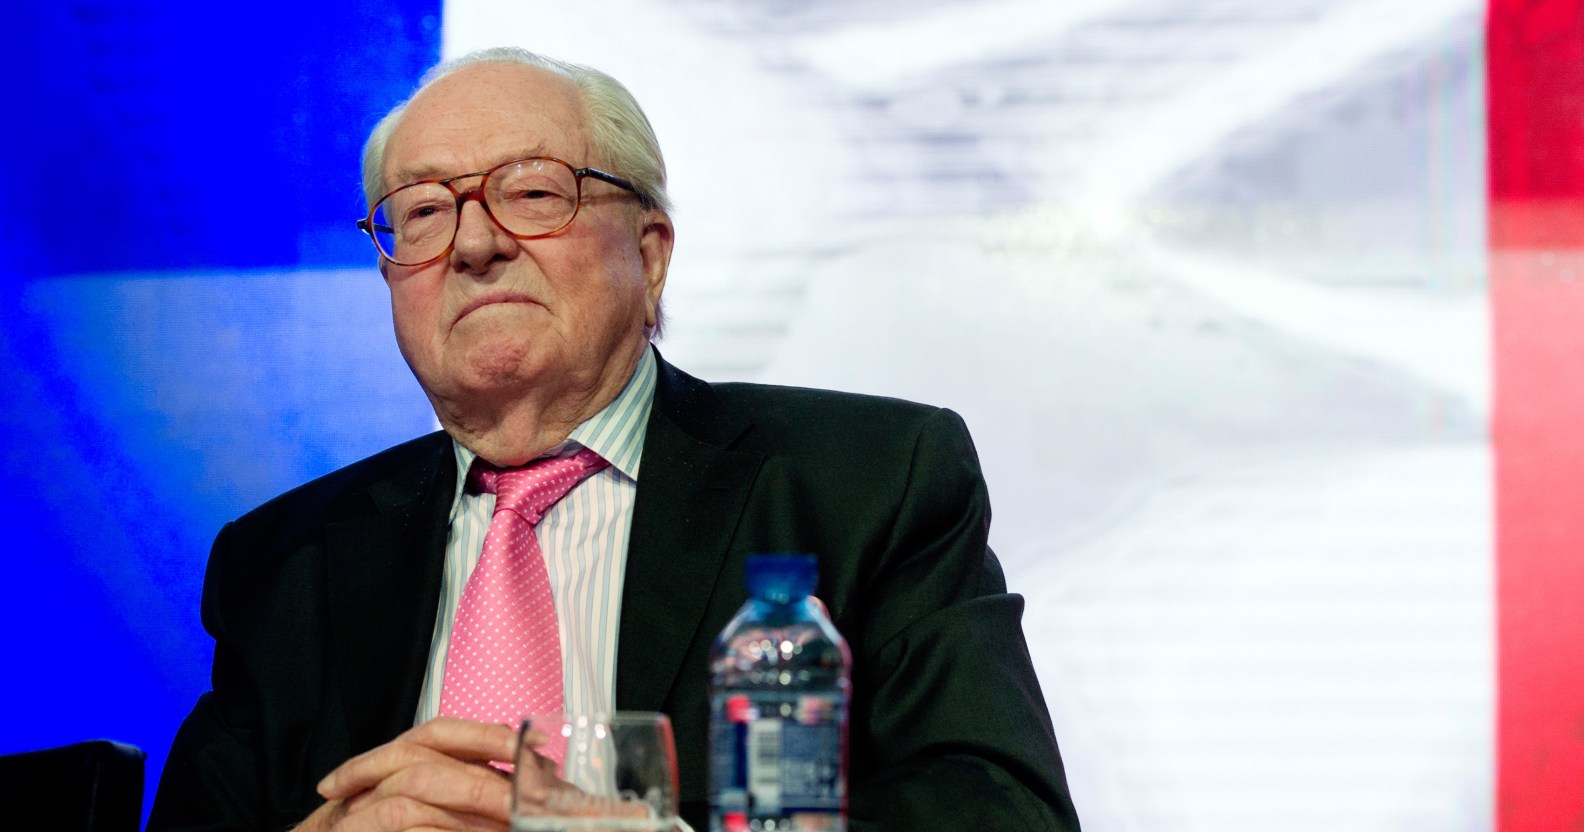 Jean-Marie Le Pen of France's National Front